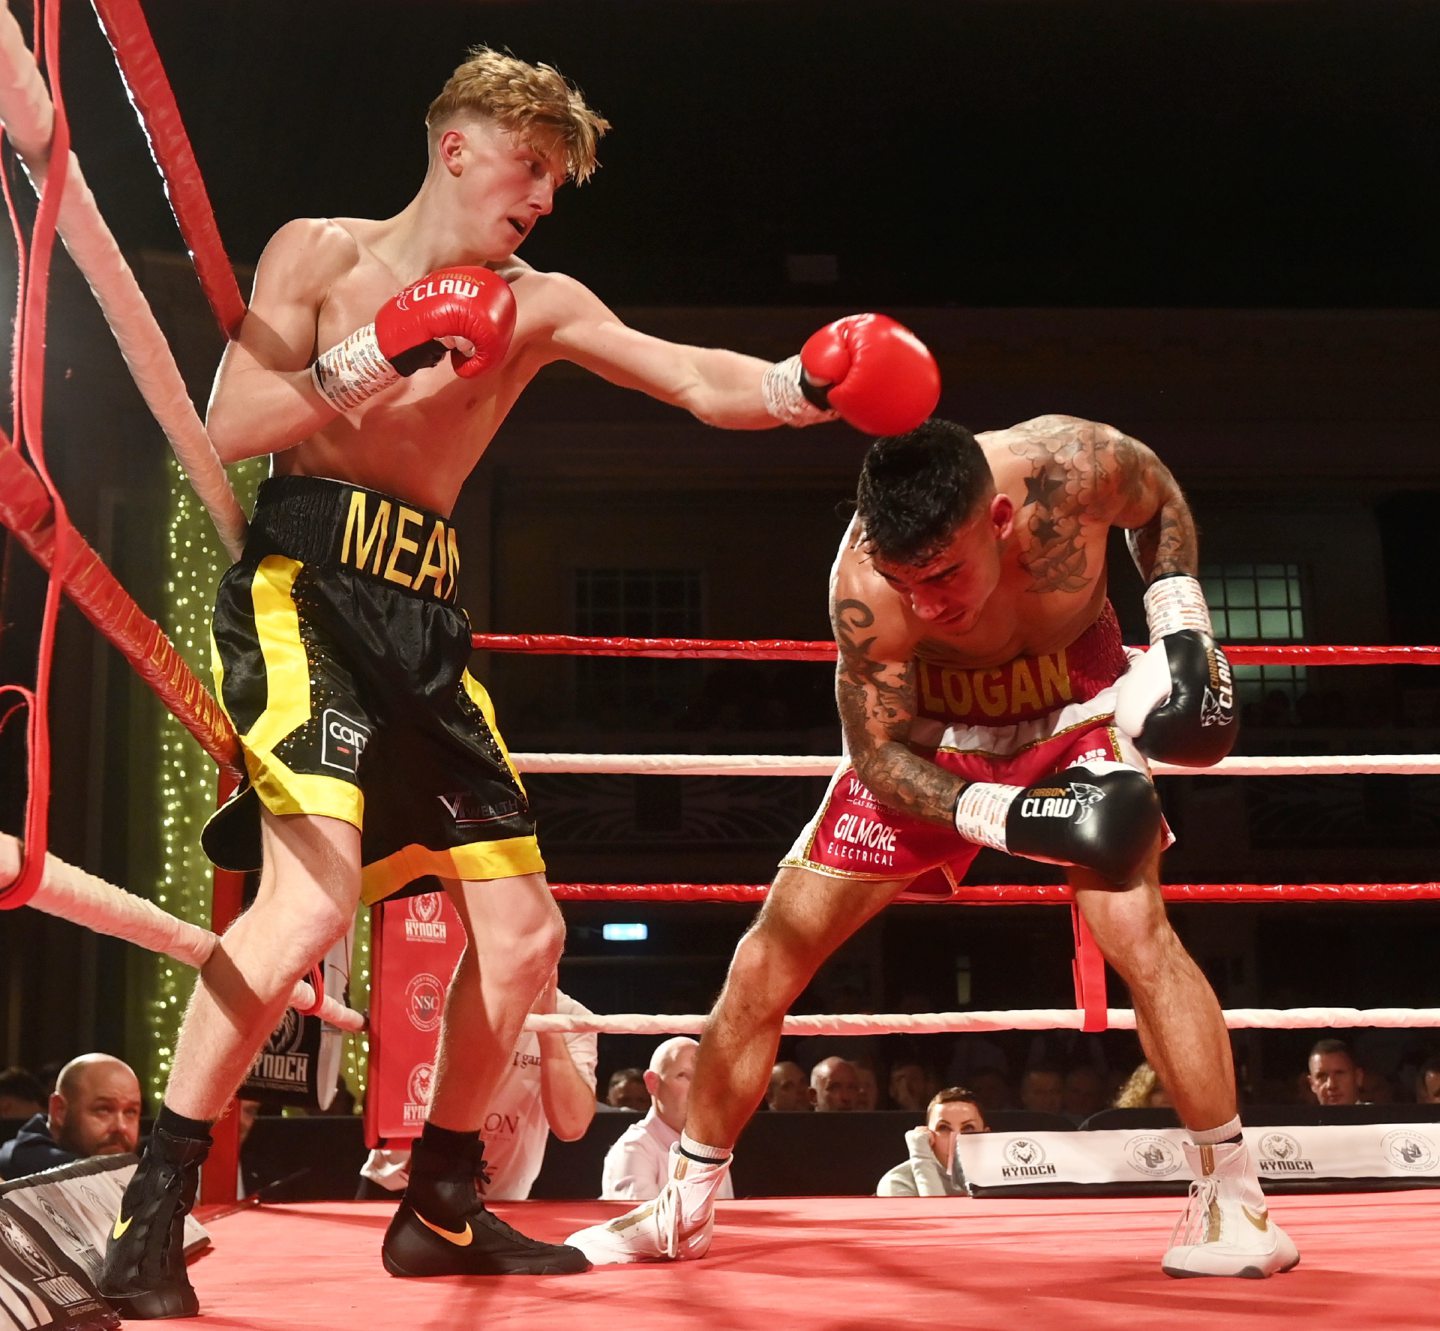 Gregor McPherson against Logan Palling, in his first professional fight.